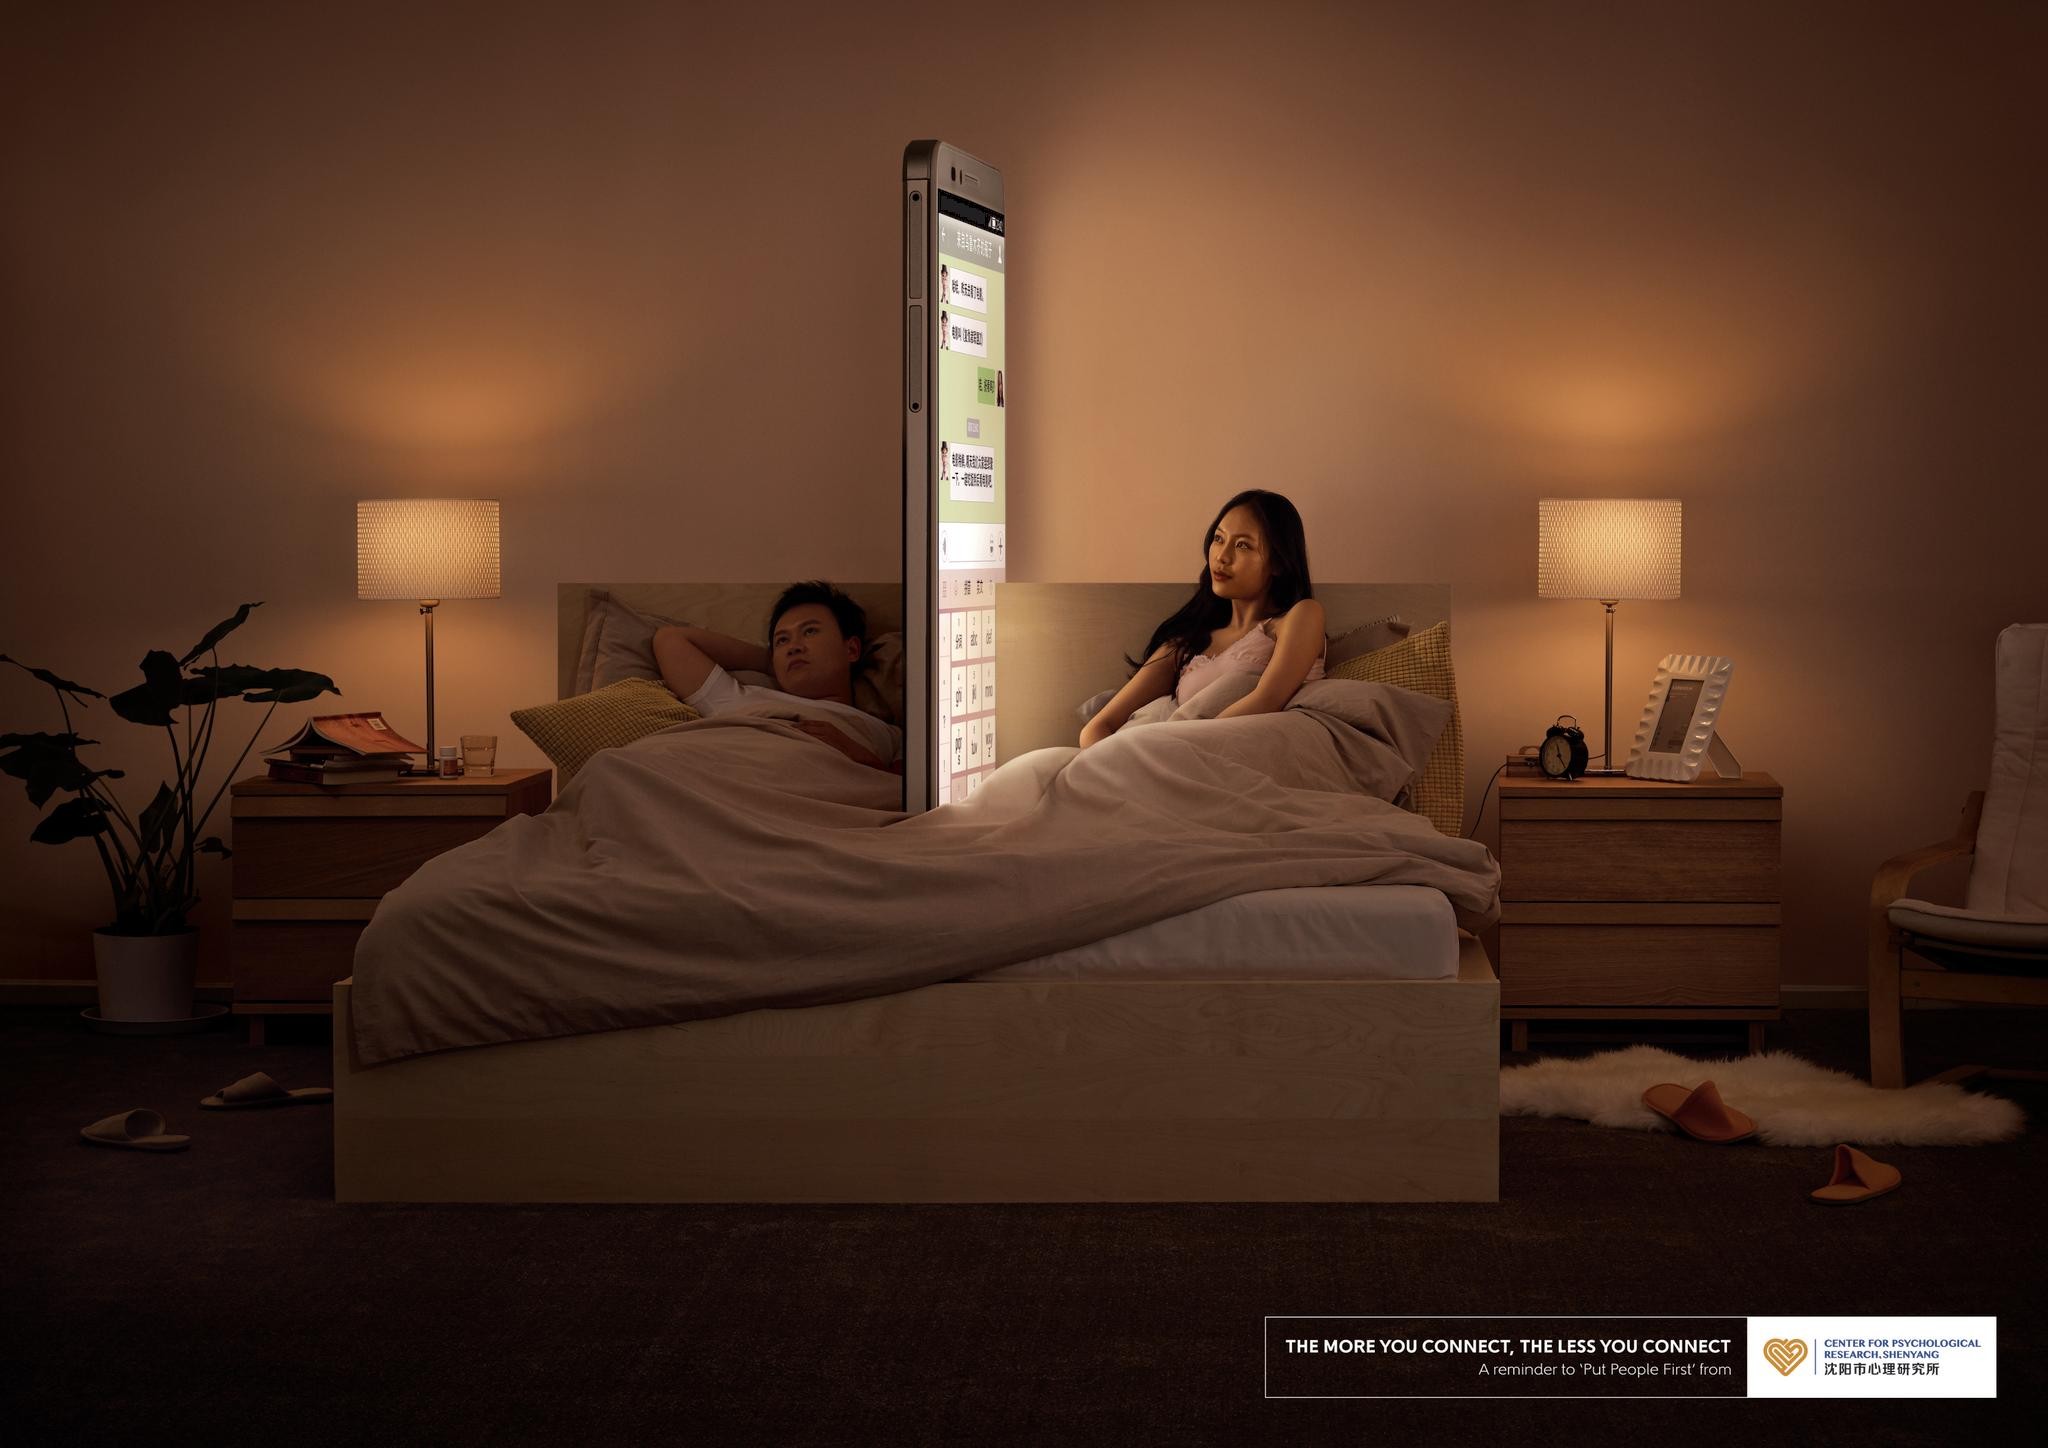 CENTER FOR PSYCHOLOGICAL RESEARCH, SHENYANG PHONE WALL CAMPAIGN - BEDROOM